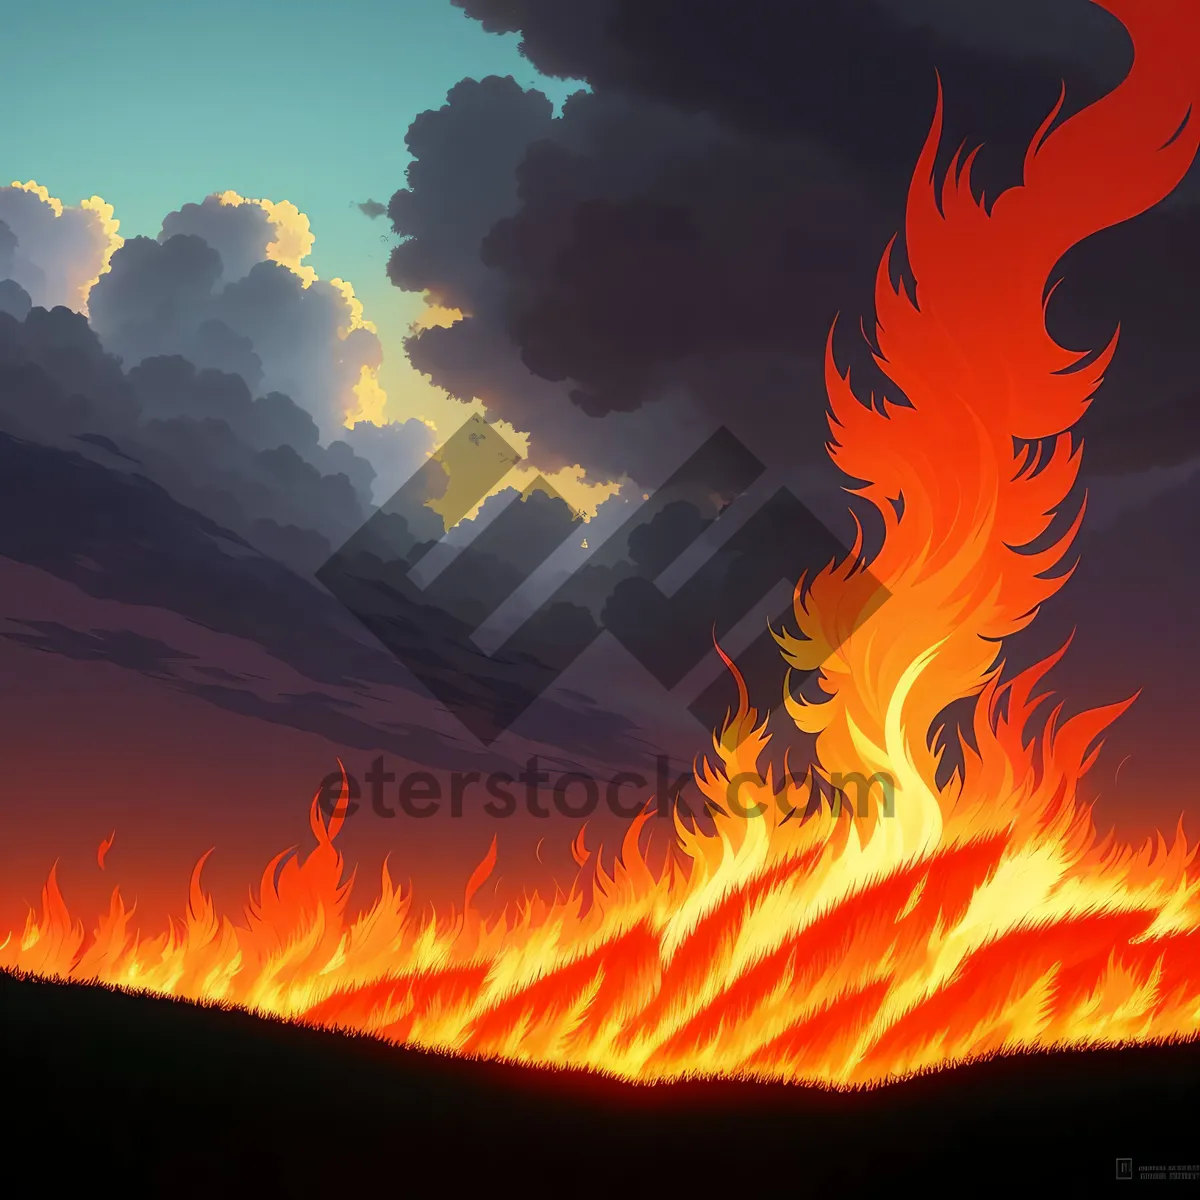 Picture of Blazing Inferno: A Fiery Dance of Flames